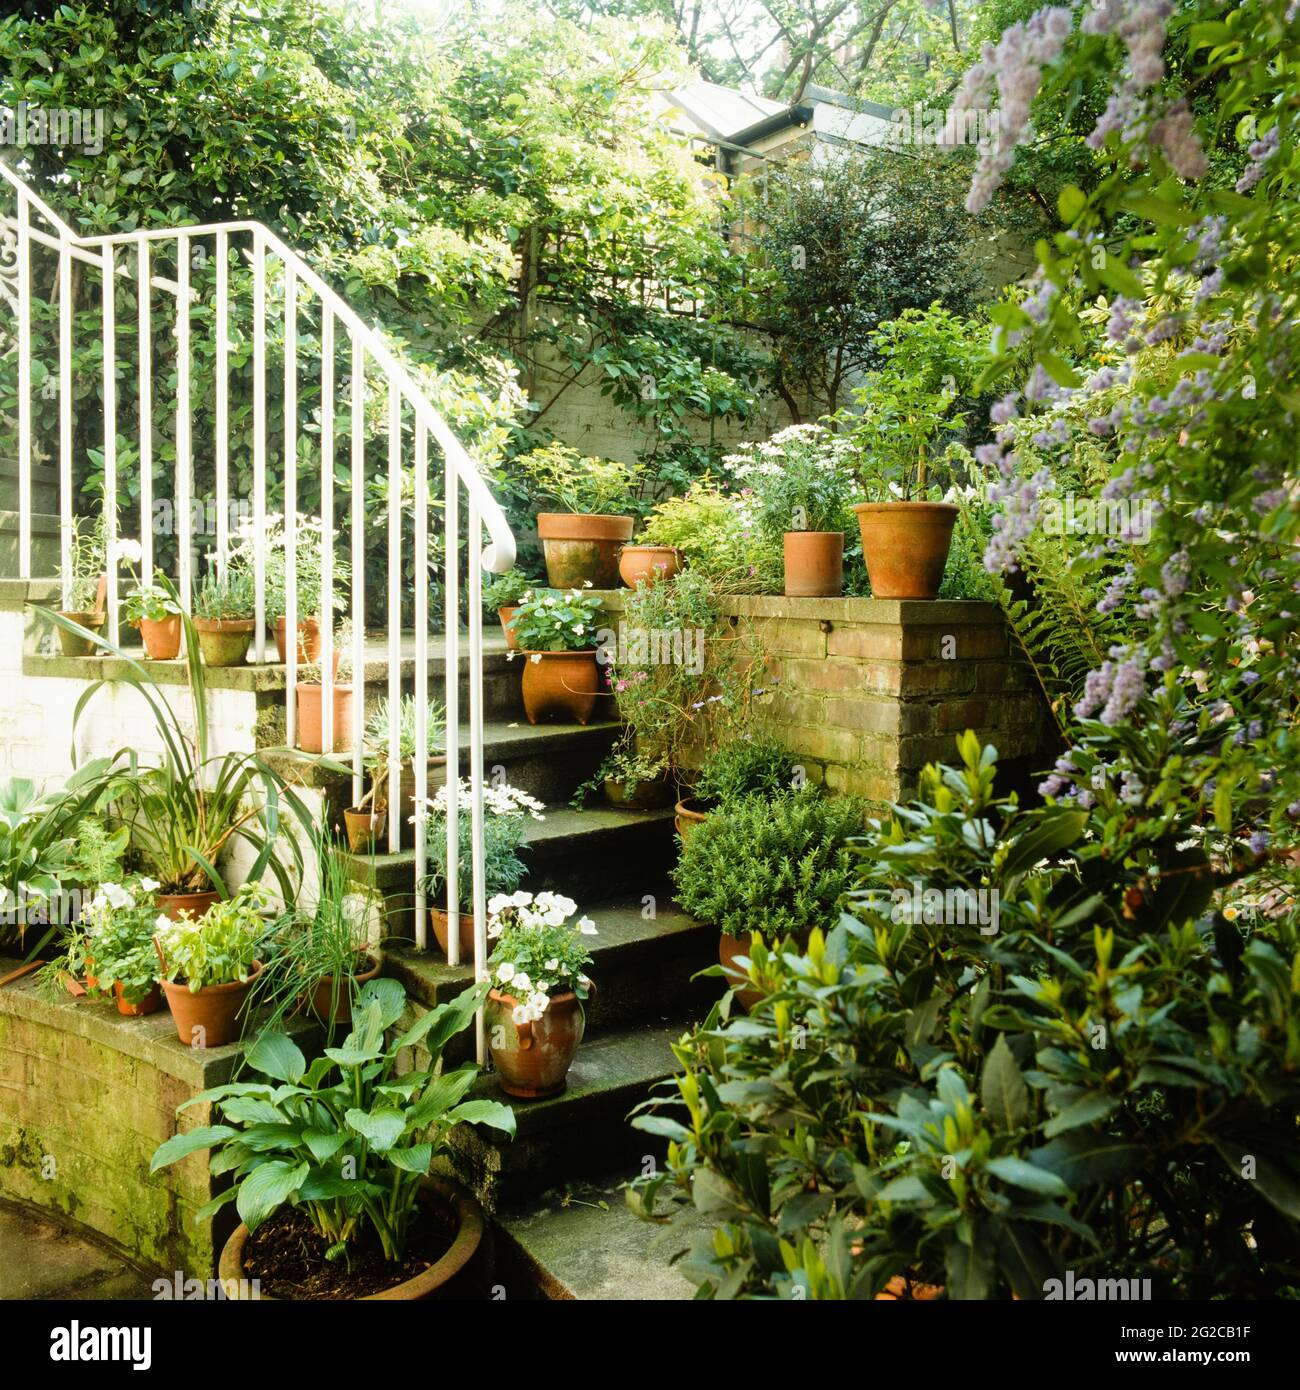 Flower pots on staircase in garden Stock Photo